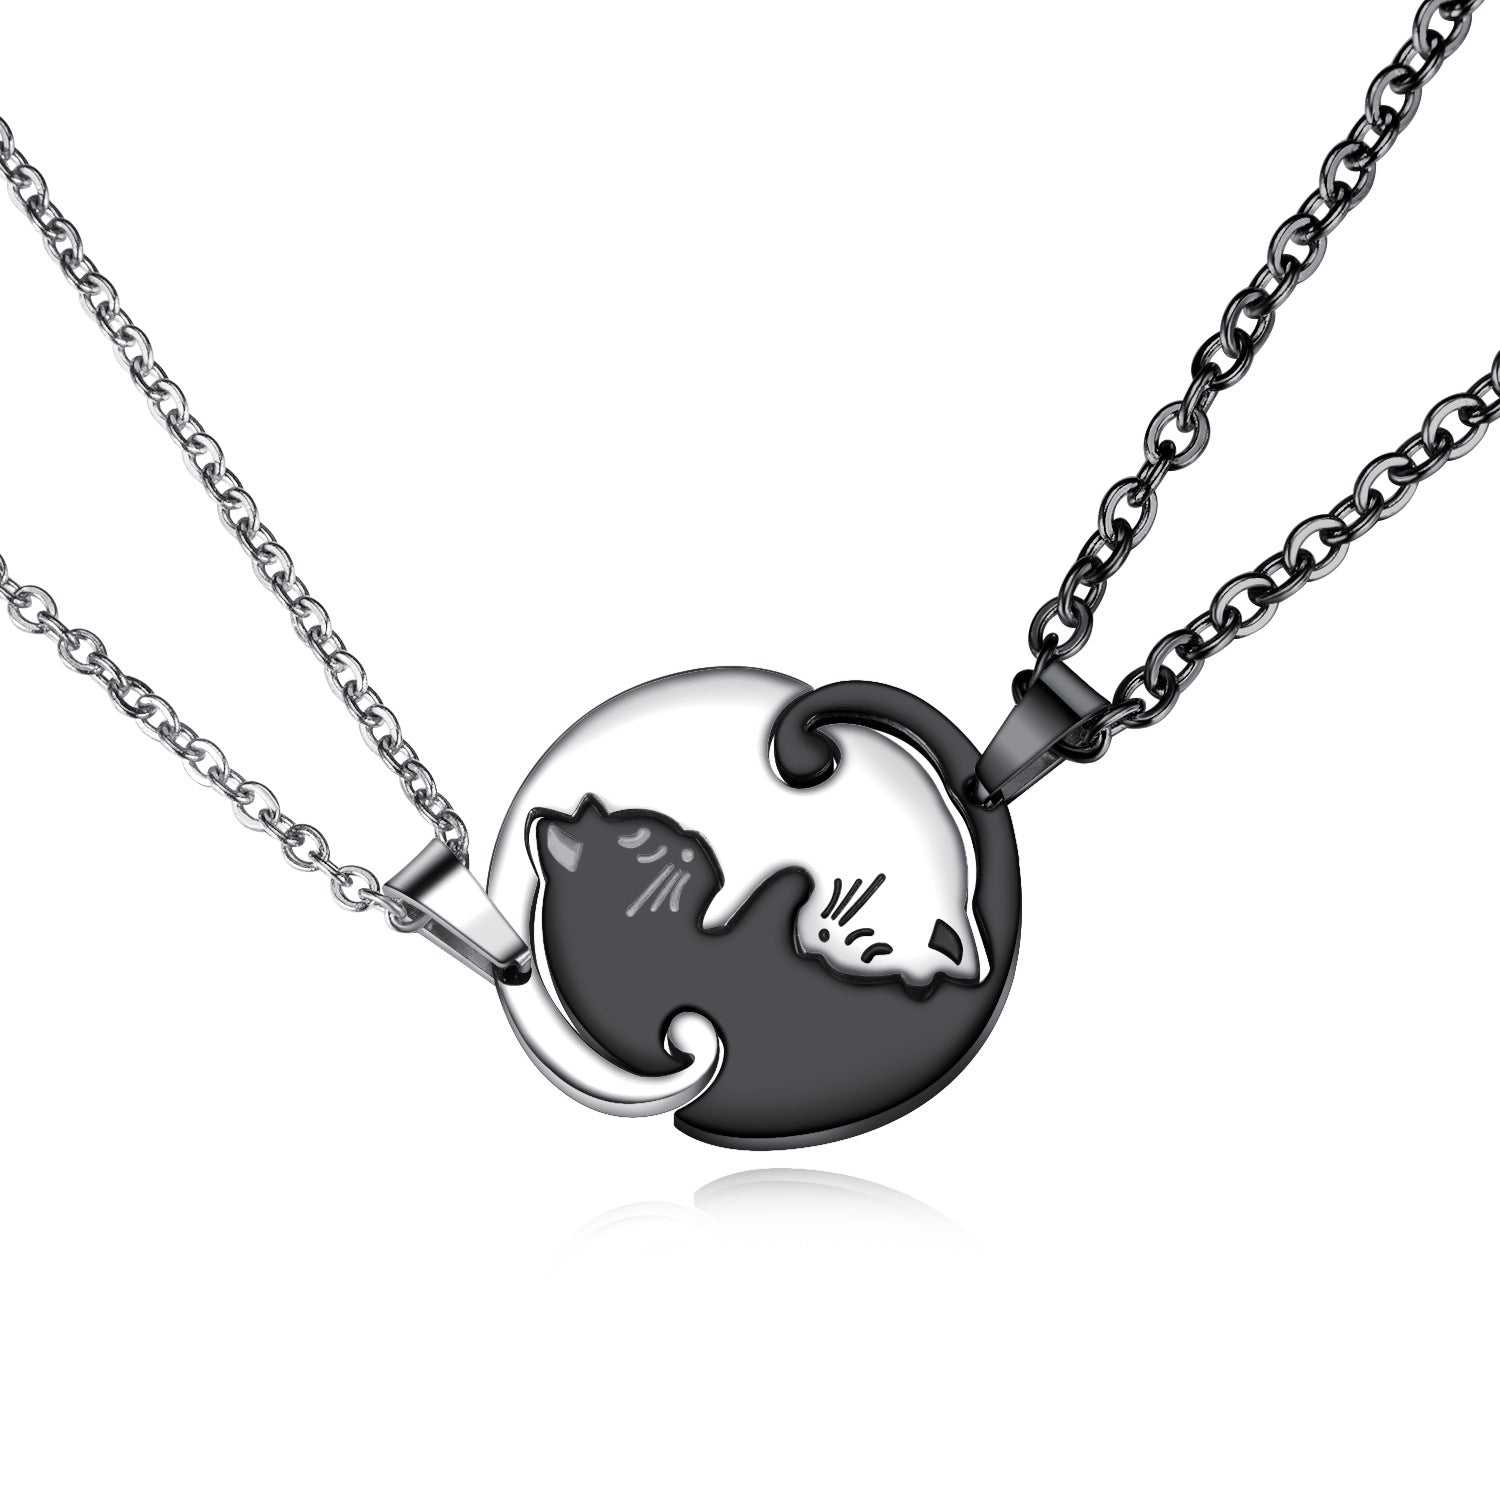 Splicing A Pair Of Kittens-Embracing Necklace Couple Titanium Steel Pendant